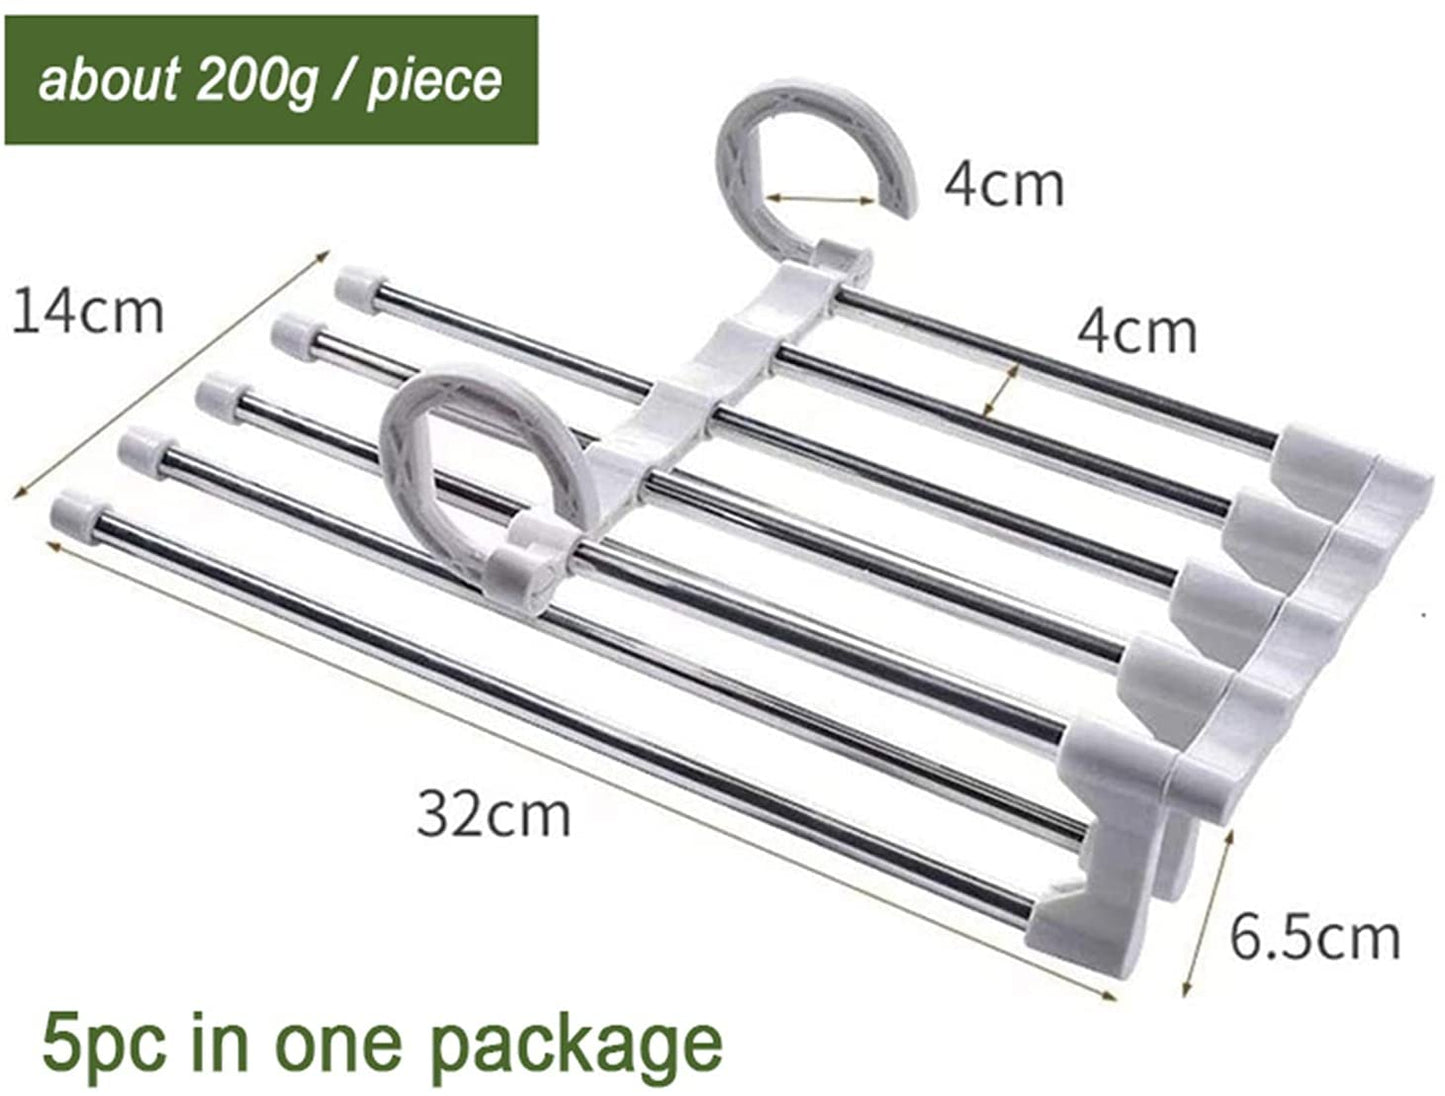 5 in 1 Layered Cloth Organizer Hanger (Stainless Steel Quality)